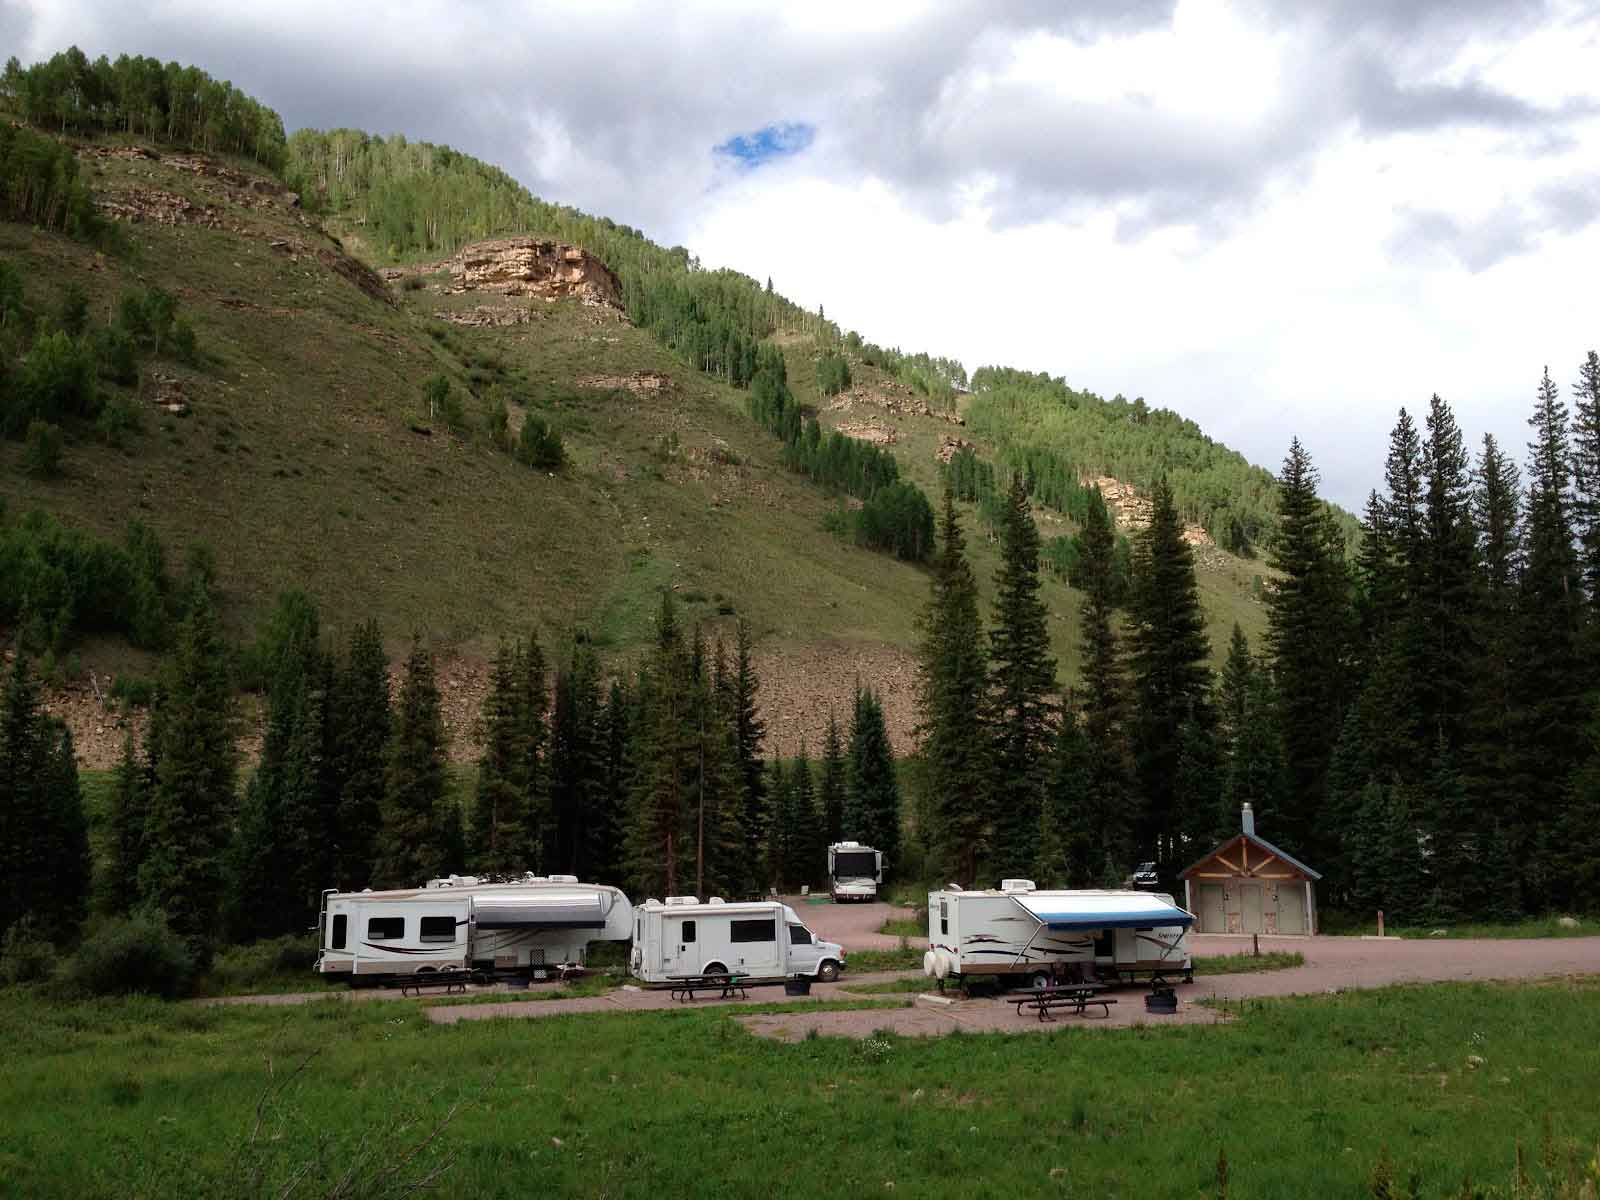 RVs parked in Recreation Area